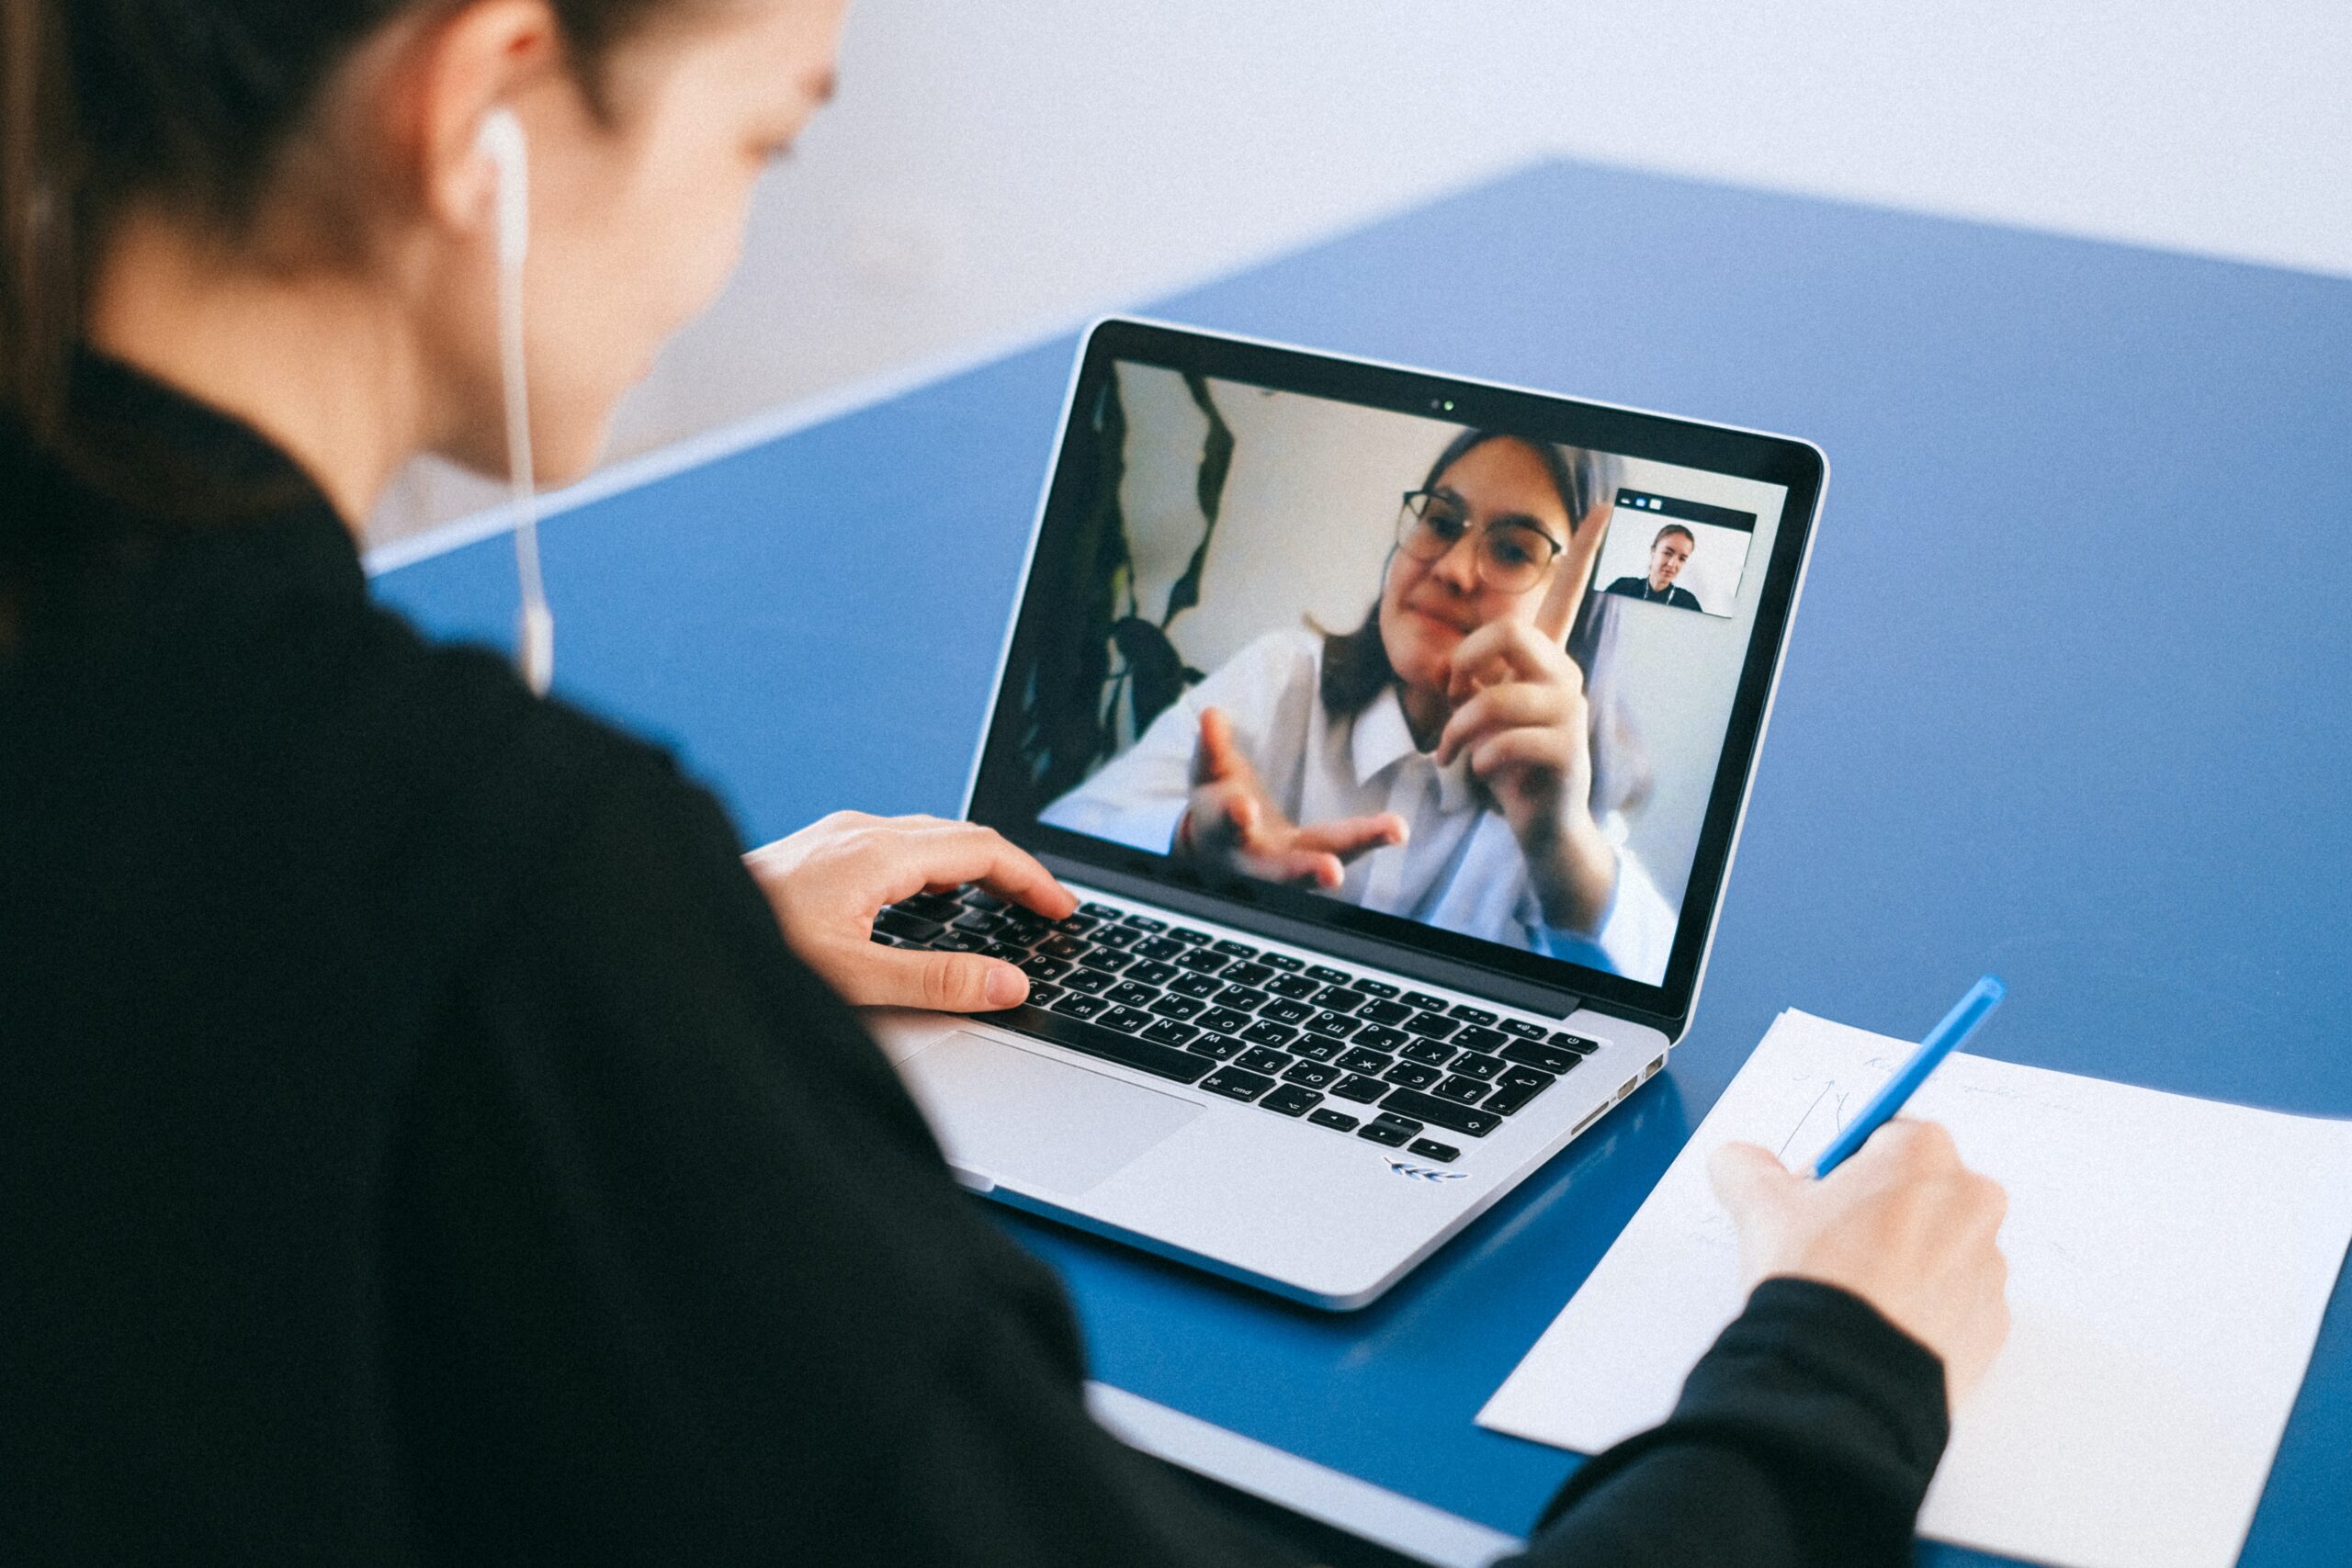 BEST PRACTICES FOR FIGHTING VIDEO FATIGUE IN ONLINE LEARNING